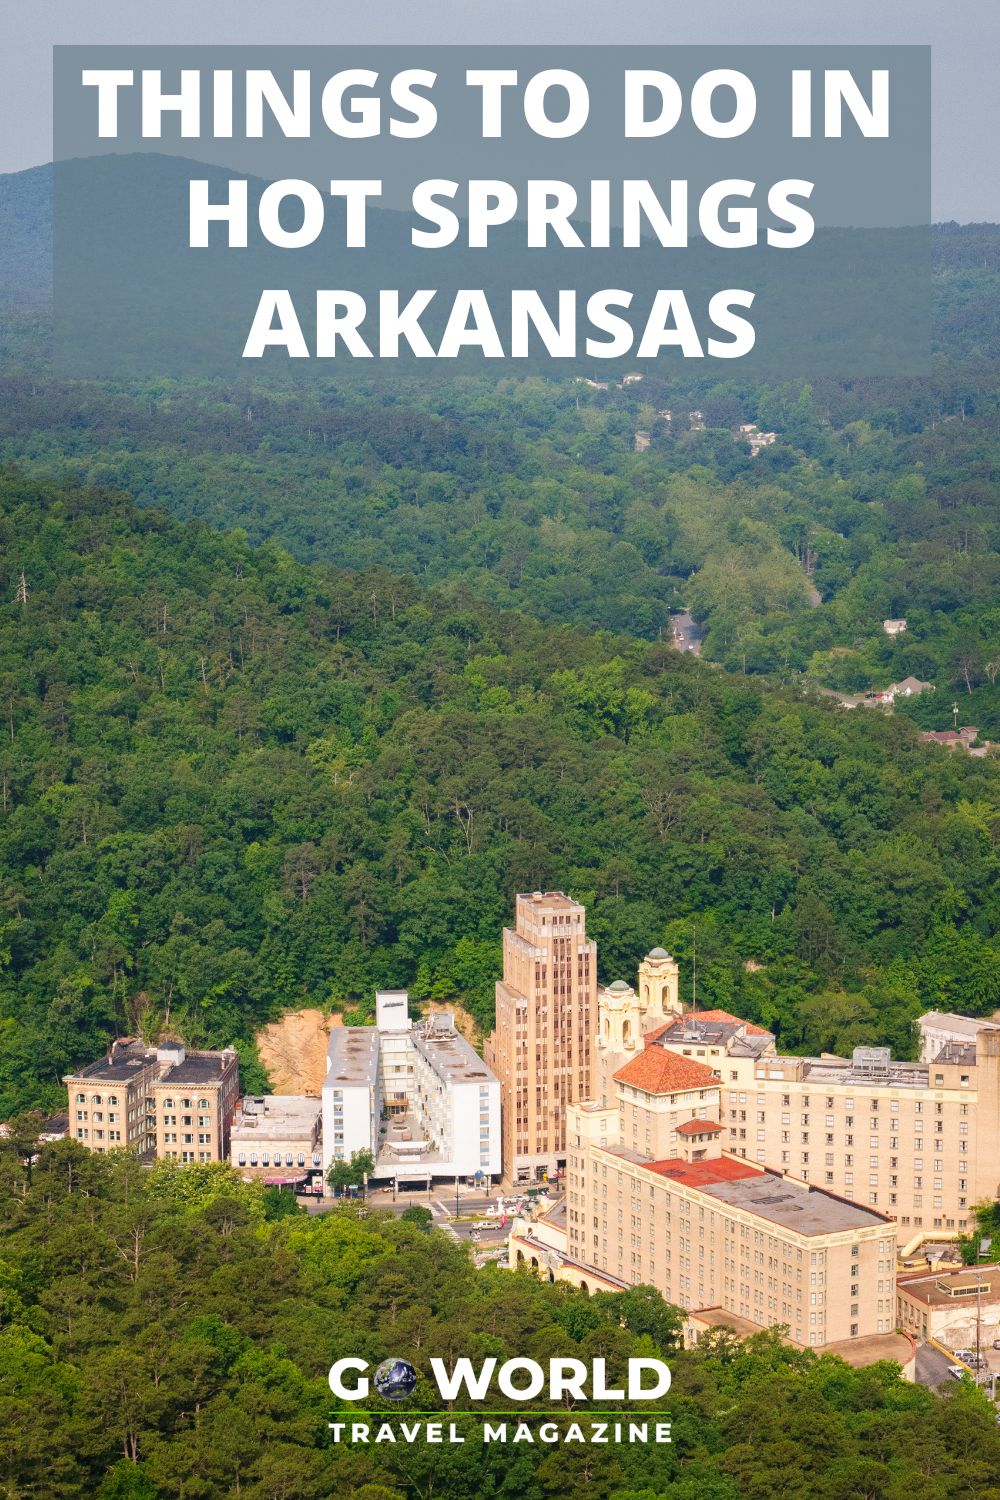 Planning a visit to Hot Springs National Park? Read about the infamous history and all the fun things to do in Hot Springs Arkansas.  #hotspringsarkansas #thingstodoinhotspringsarkansas